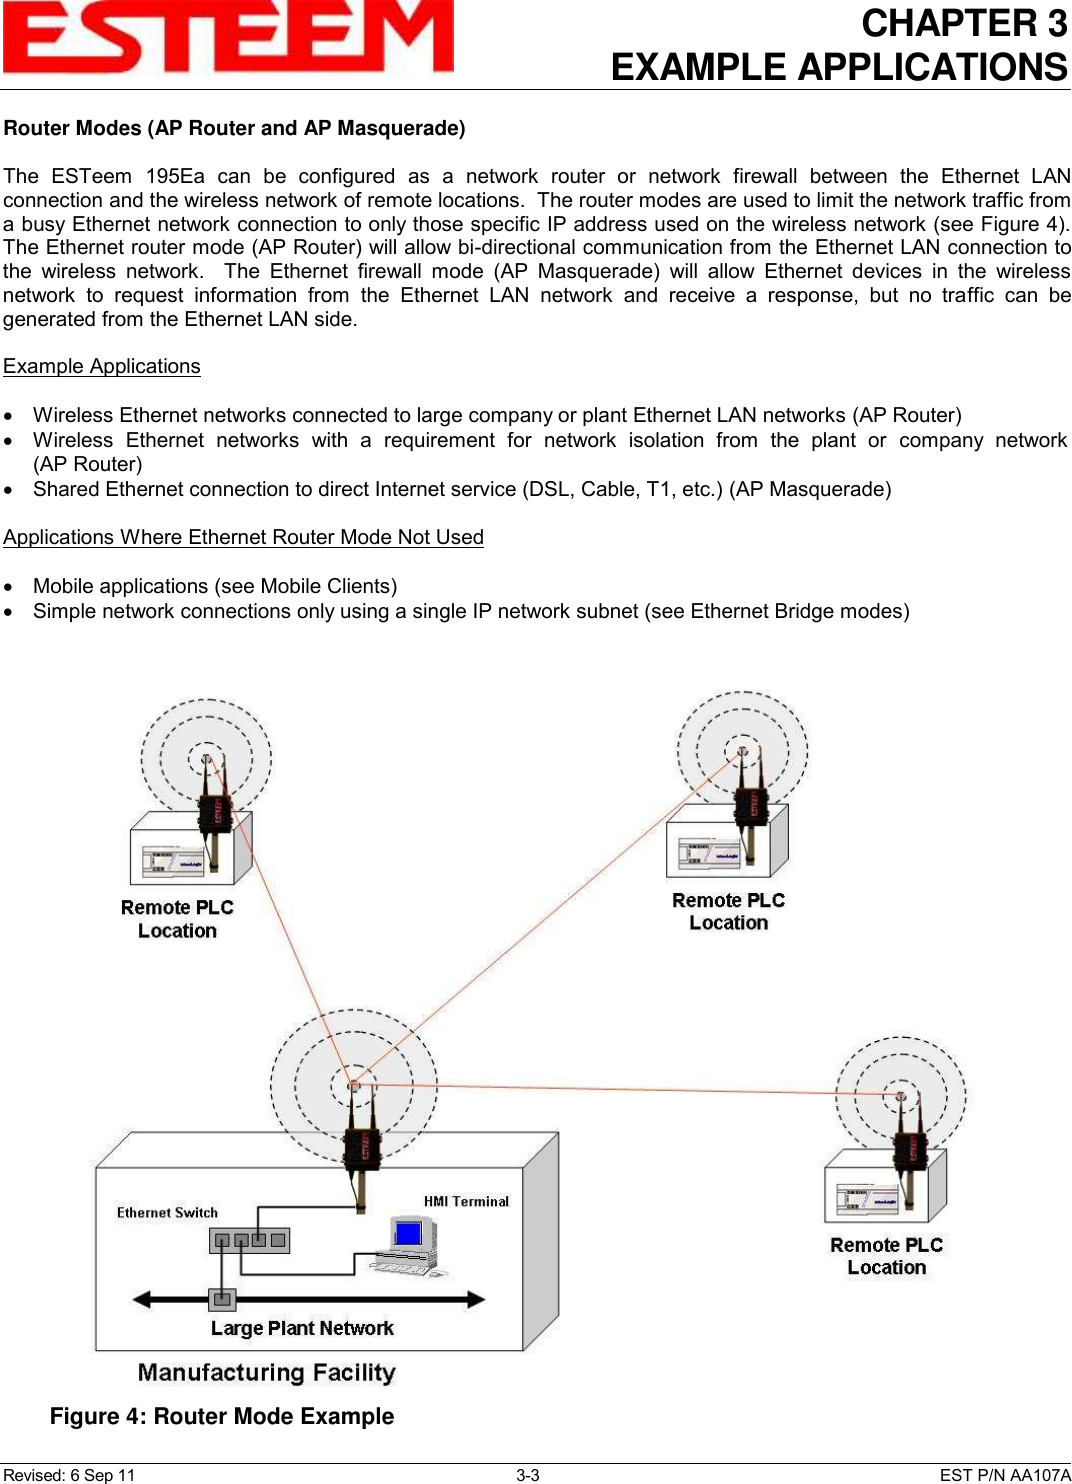 CHAPTER 3 EXAMPLE APPLICATIONS  Revised: 6 Sep 11  3-3  EST P/N AA107A Router Modes (AP Router and AP Masquerade)  The  ESTeem  195Ea  can  be  configured  as  a  network  router  or  network  firewall  between  the  Ethernet  LAN connection and the wireless network of remote locations.  The router modes are used to limit the network traffic from a busy Ethernet network connection to only those specific IP address used on the wireless network (see Figure 4). The Ethernet router mode (AP Router) will allow bi-directional communication from the Ethernet LAN connection to the  wireless  network.    The  Ethernet  firewall  mode  (AP  Masquerade)  will  allow  Ethernet  devices  in  the  wireless network  to  request  information  from  the  Ethernet  LAN  network  and  receive  a  response,  but  no  traffic  can  be generated from the Ethernet LAN side.  Example Applications    Wireless Ethernet networks connected to large company or plant Ethernet LAN networks (AP Router)   Wireless  Ethernet  networks  with  a  requirement  for  network  isolation  from  the  plant  or  company  network (AP Router)   Shared Ethernet connection to direct Internet service (DSL, Cable, T1, etc.) (AP Masquerade)  Applications Where Ethernet Router Mode Not Used    Mobile applications (see Mobile Clients)   Simple network connections only using a single IP network subnet (see Ethernet Bridge modes)   Figure 4: Router Mode Example  